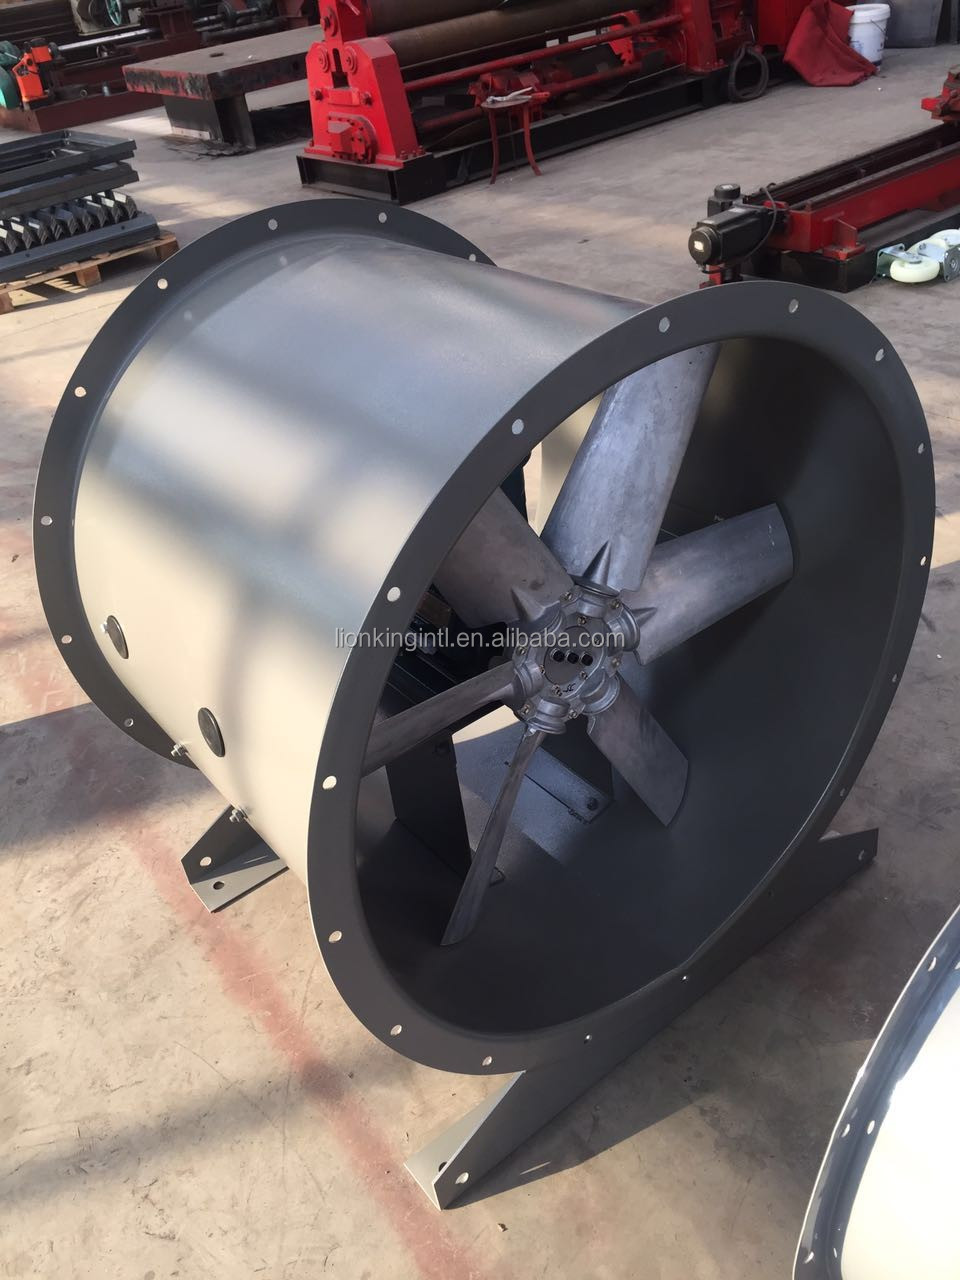 Axial Exhaust Fan for Coal Mine Air Ventilation